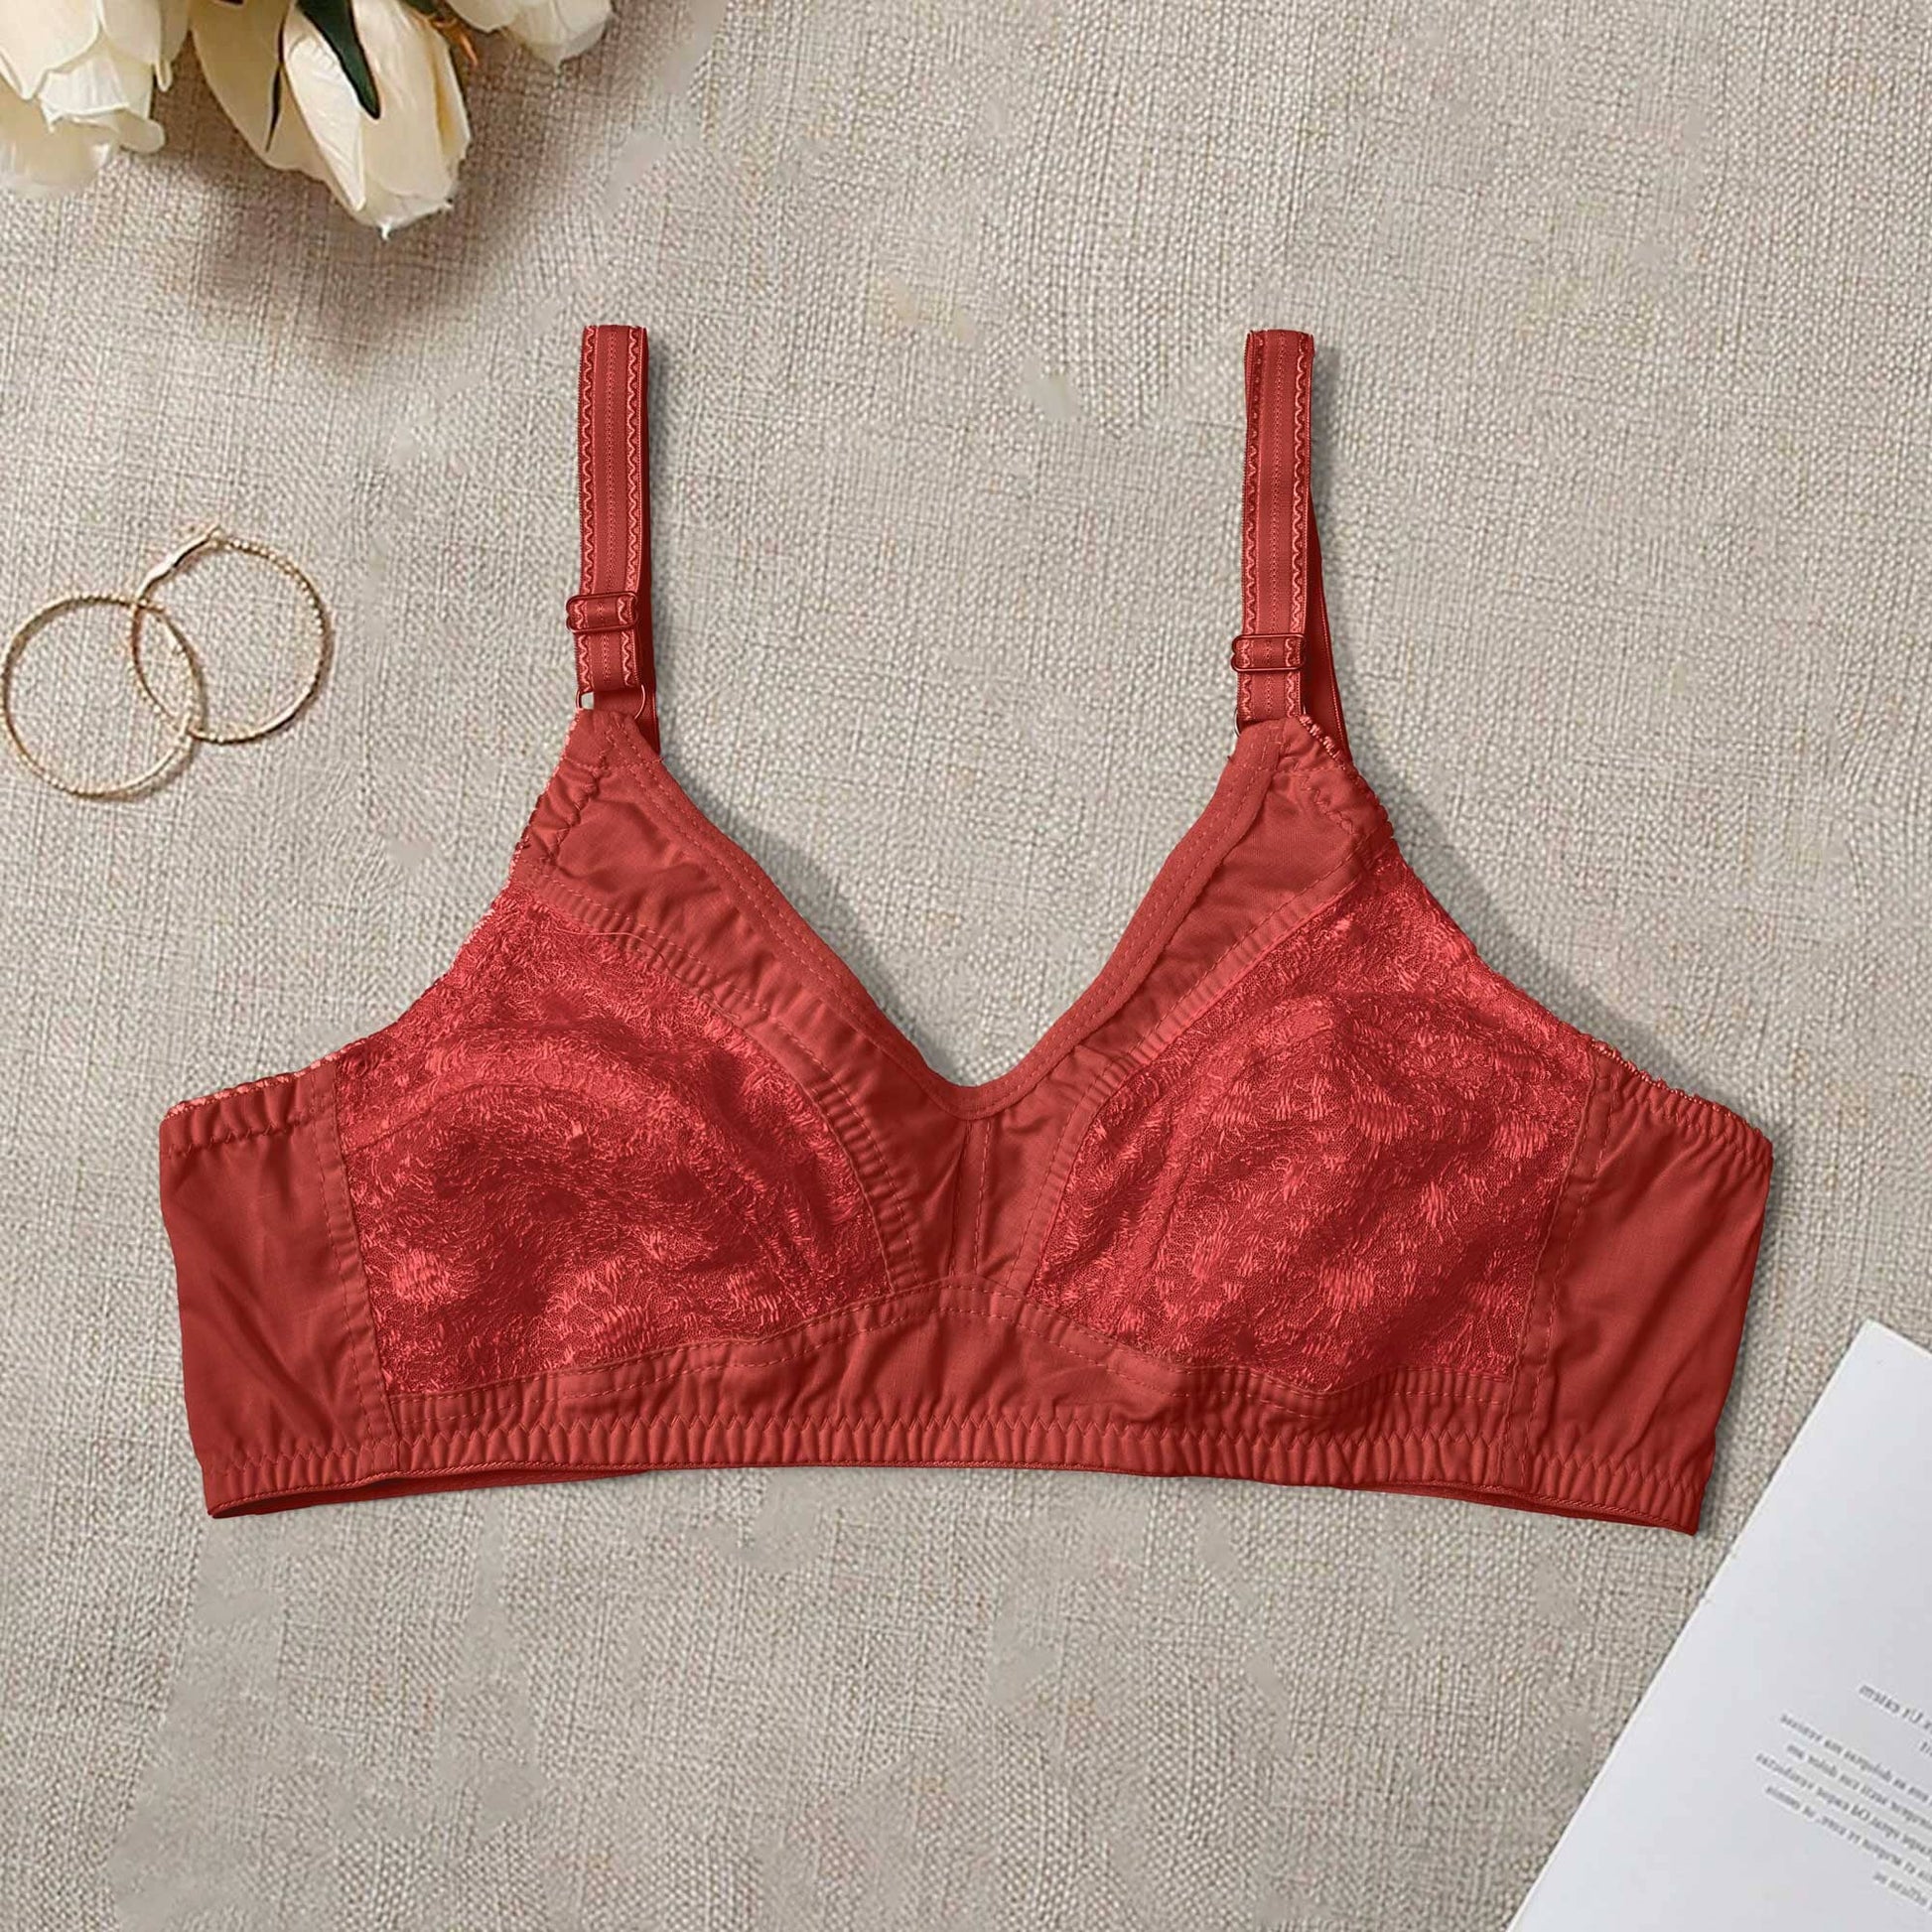 Net Push-Up Pink Bralette Bra, Size: Medium, Embroidered at Rs 75